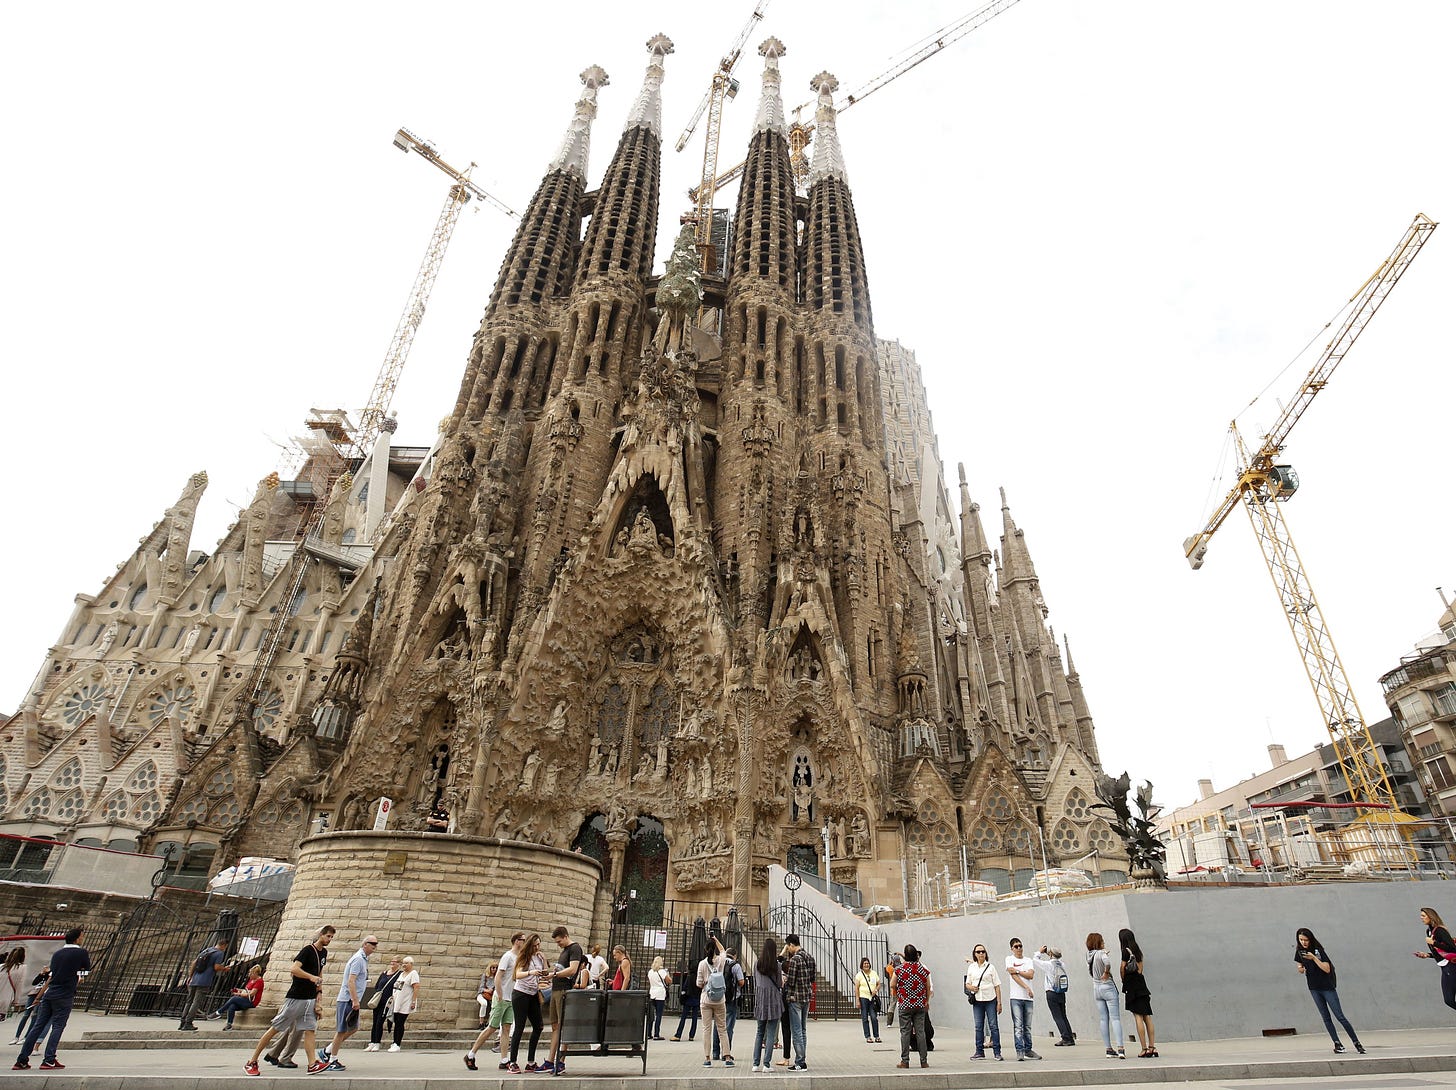 La Sagrada Familia Gets Permit After 137 Years Without One : NPR